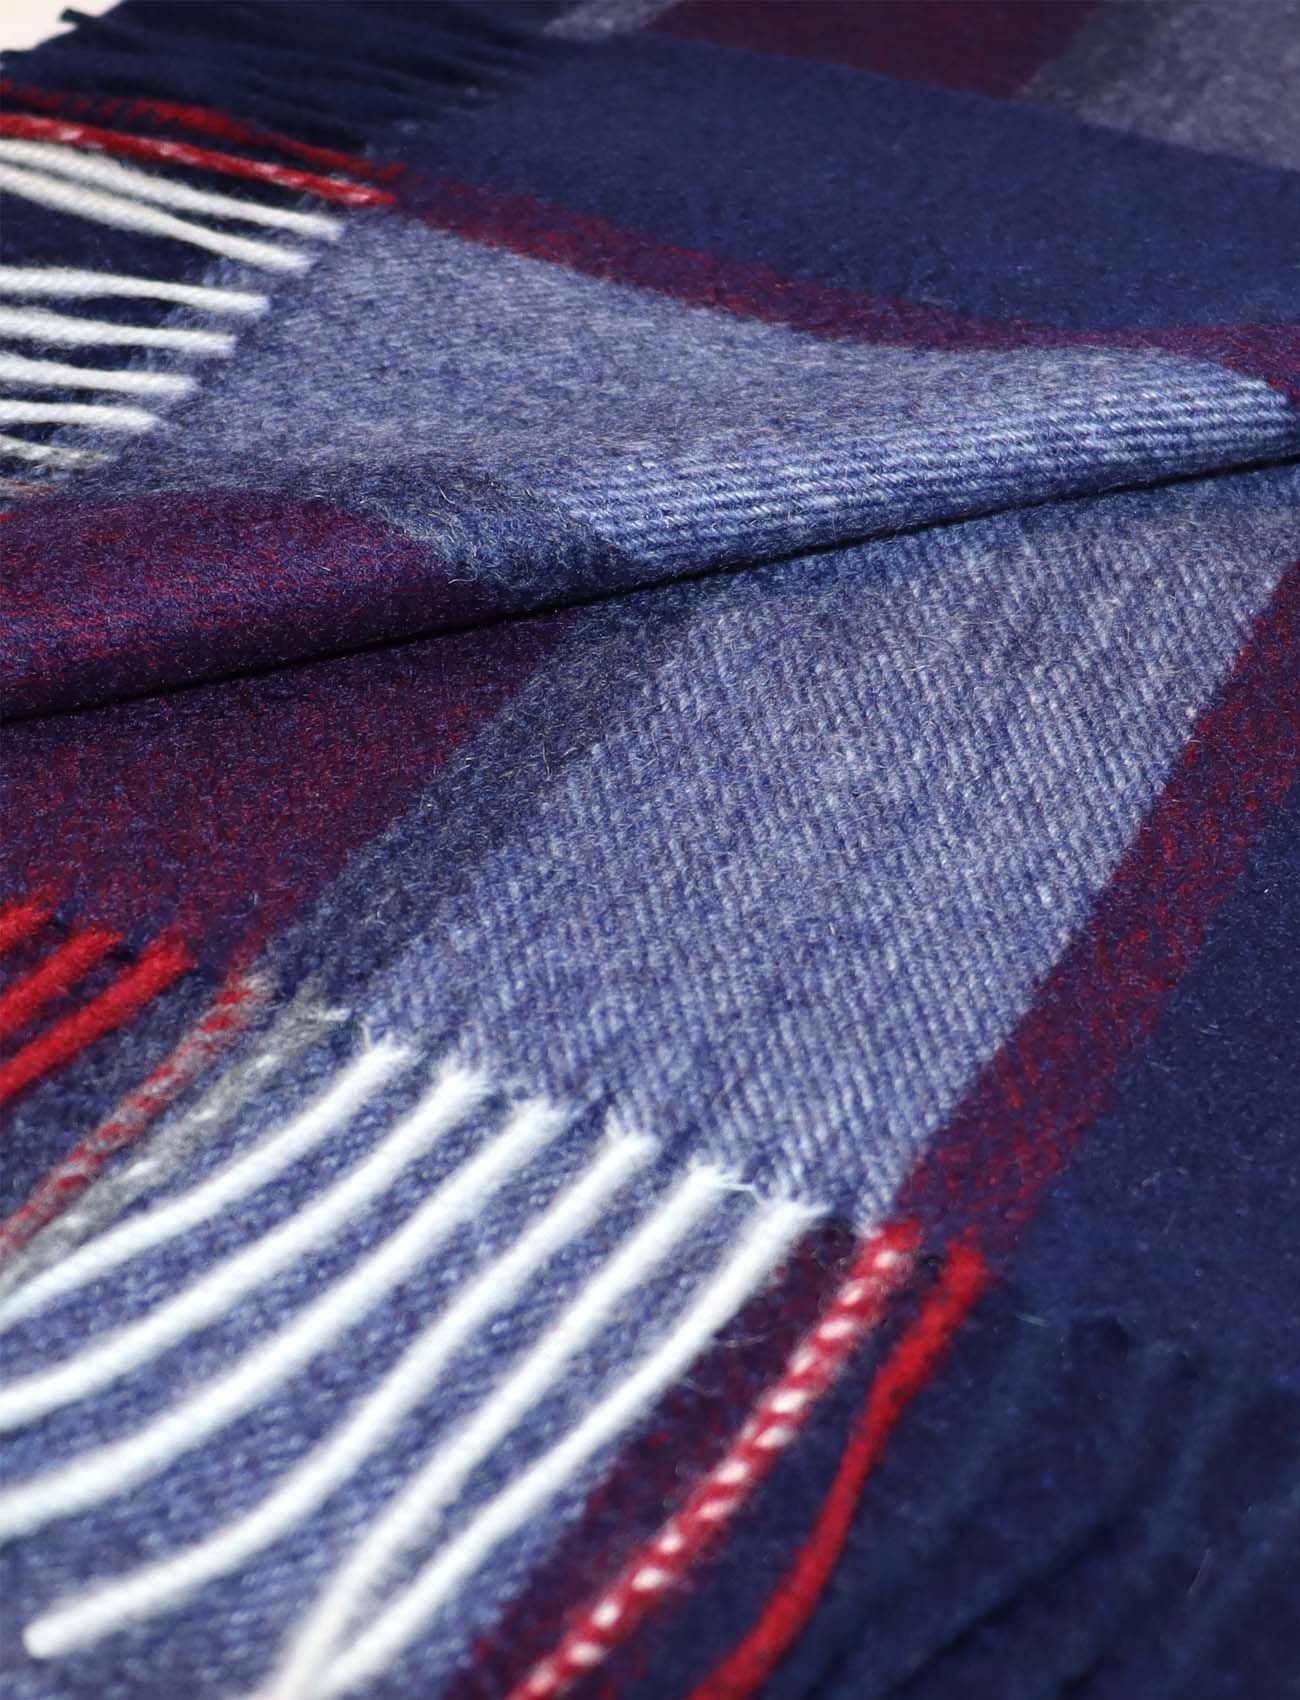 Striped Cashmere Scarf in navy blue for women and men details